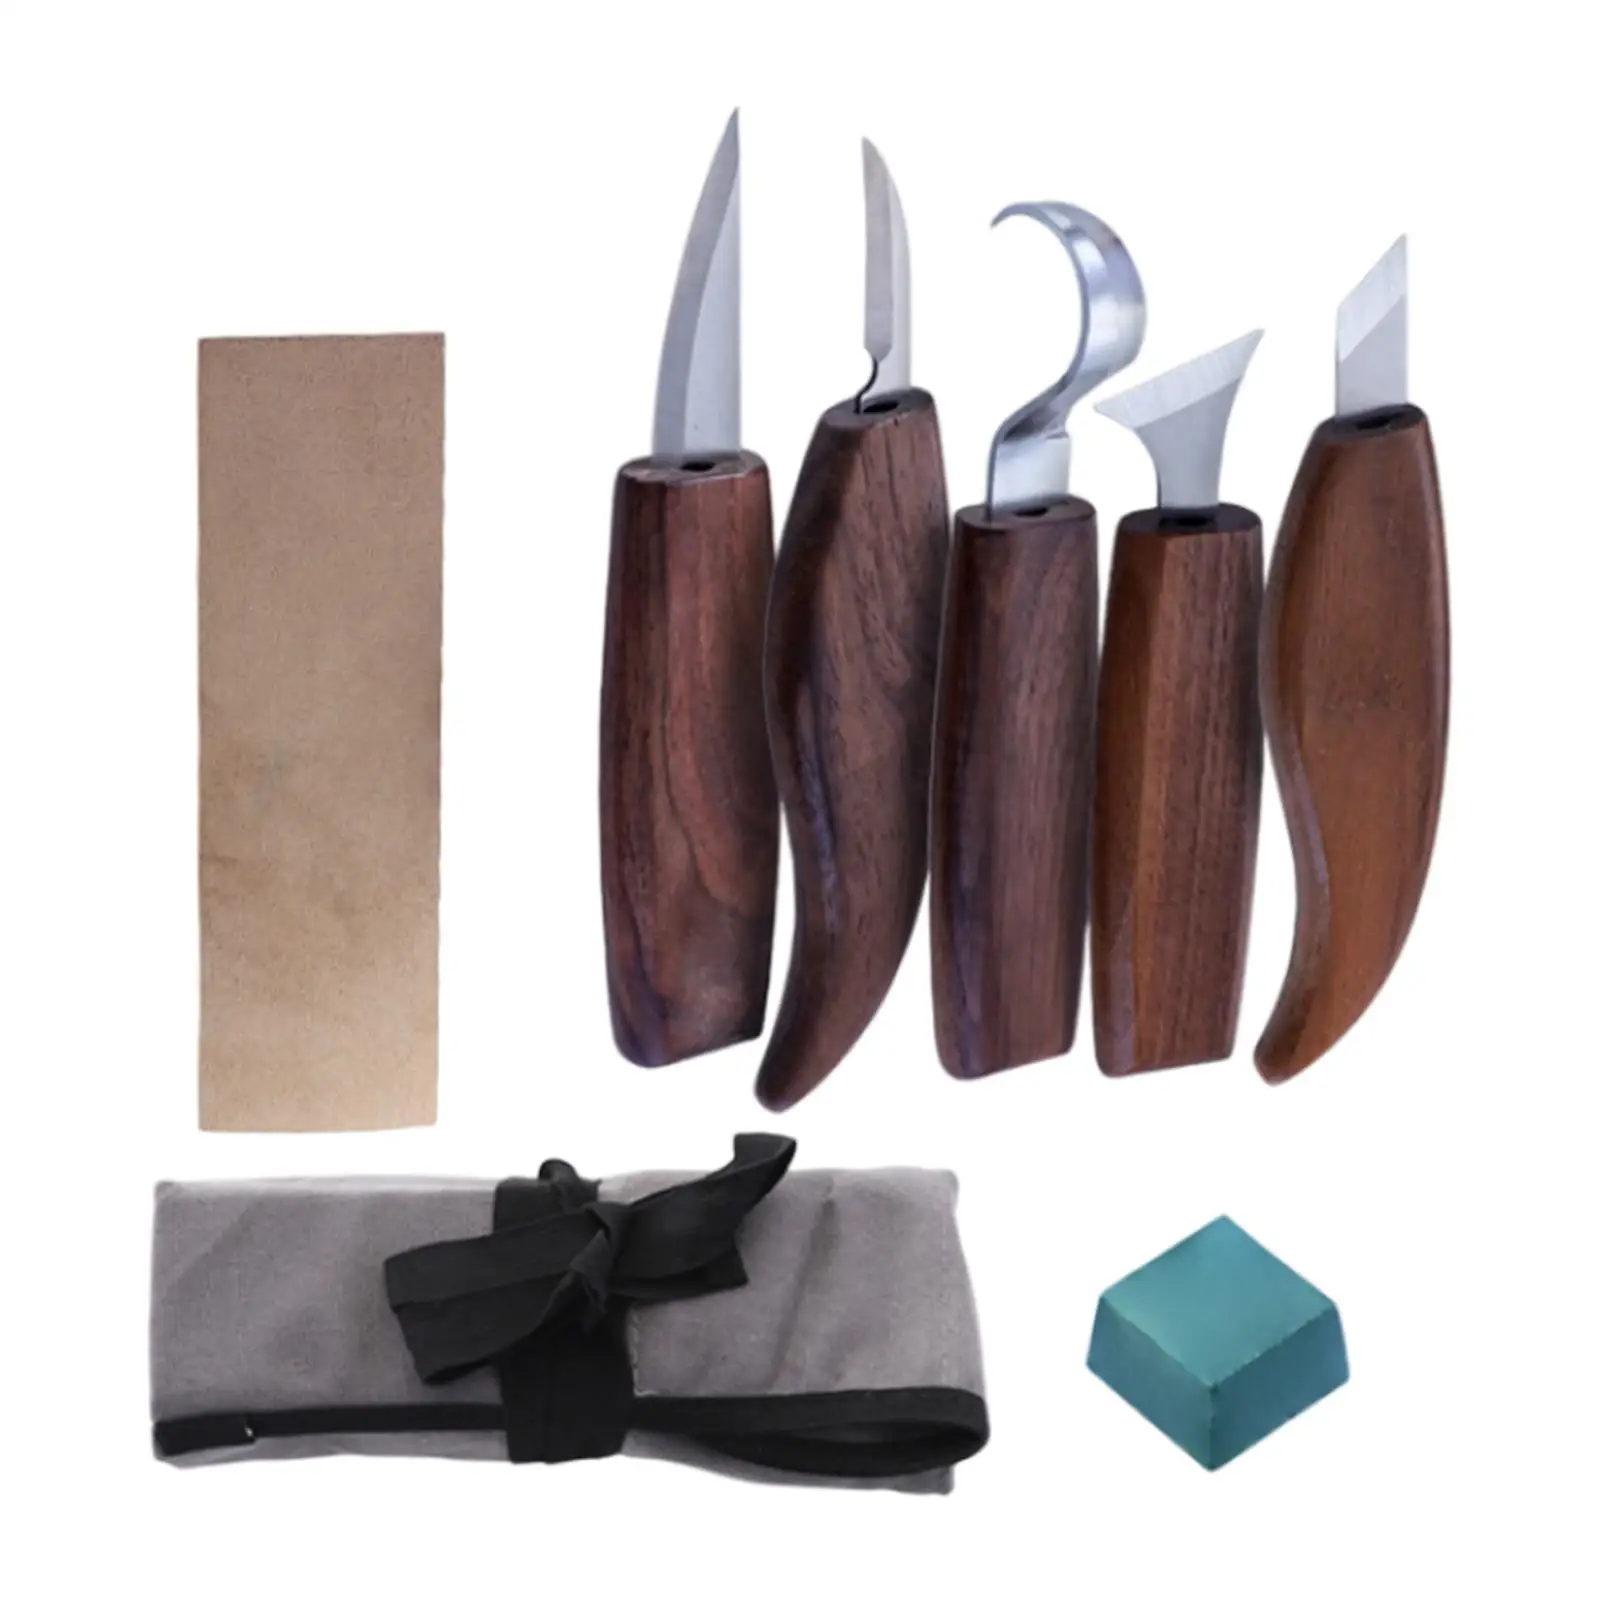 8x Wood Carving Kits with Storage Bag Fine Carving Wear Resistant Woodworking DIY Carving Tool for Paper Carving Plaster Carving